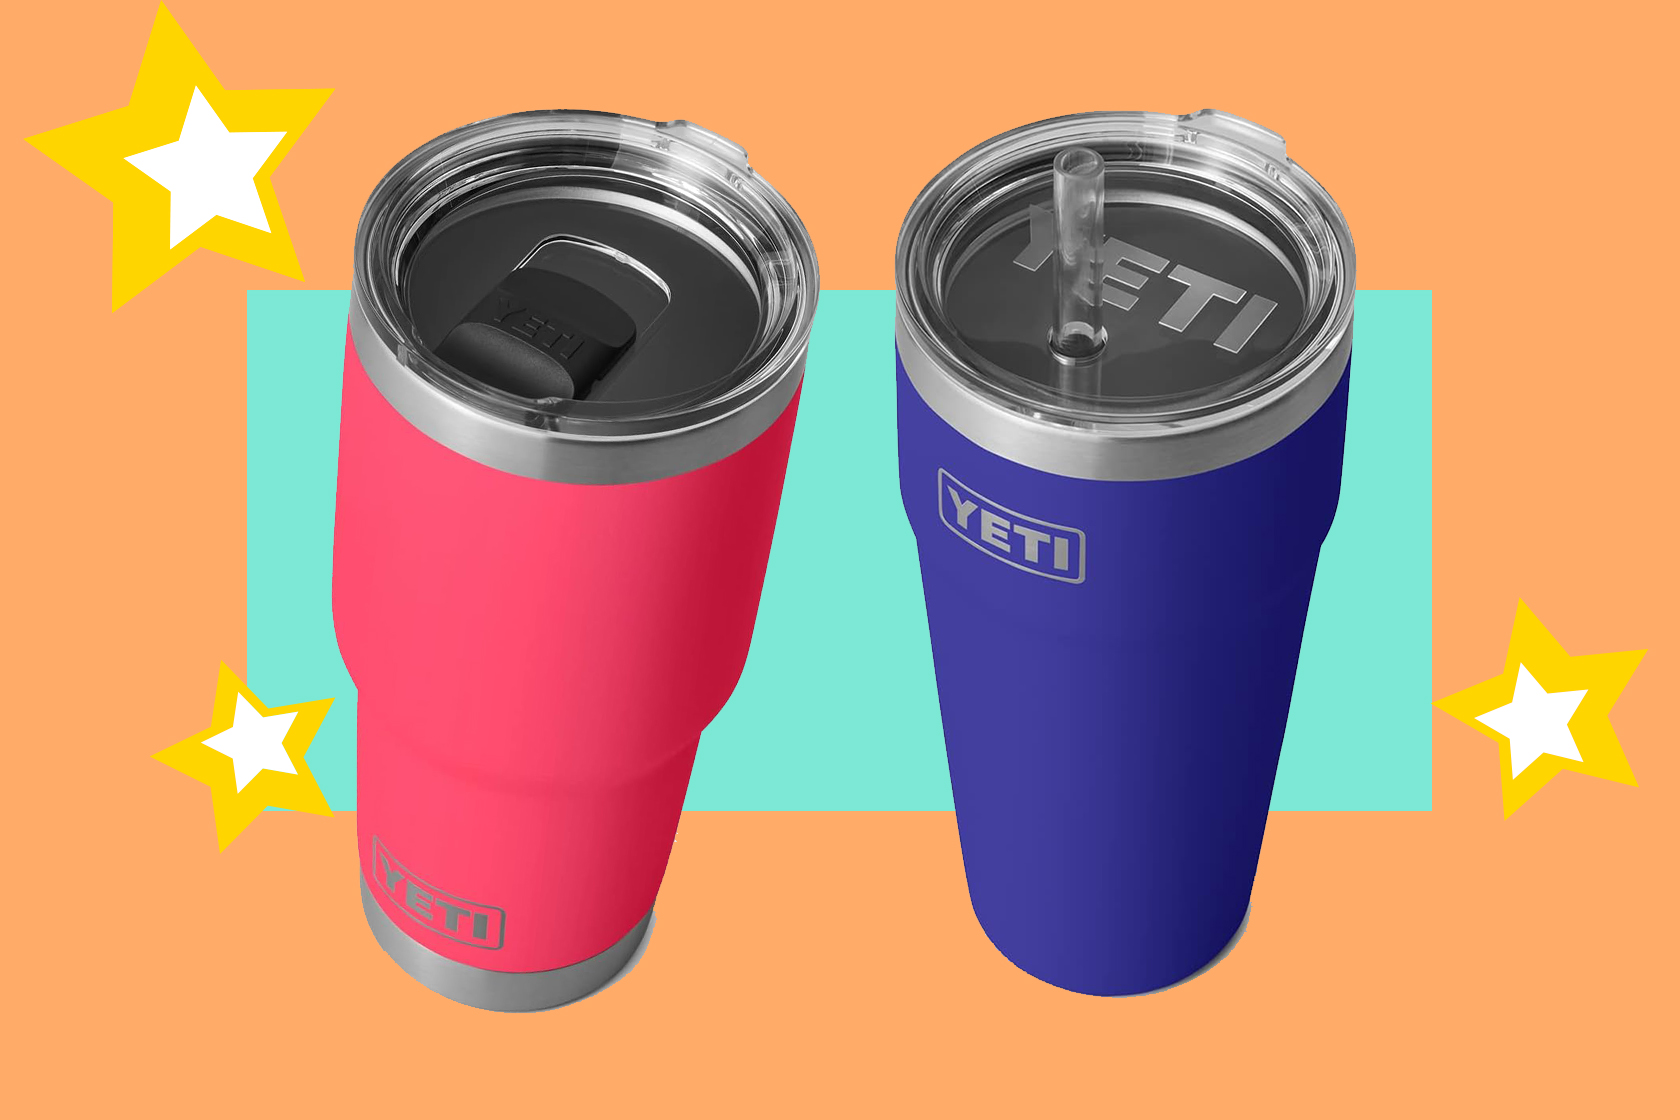 Yeti Prime Day Sale 2023: Save up to 50% Off Drinkware